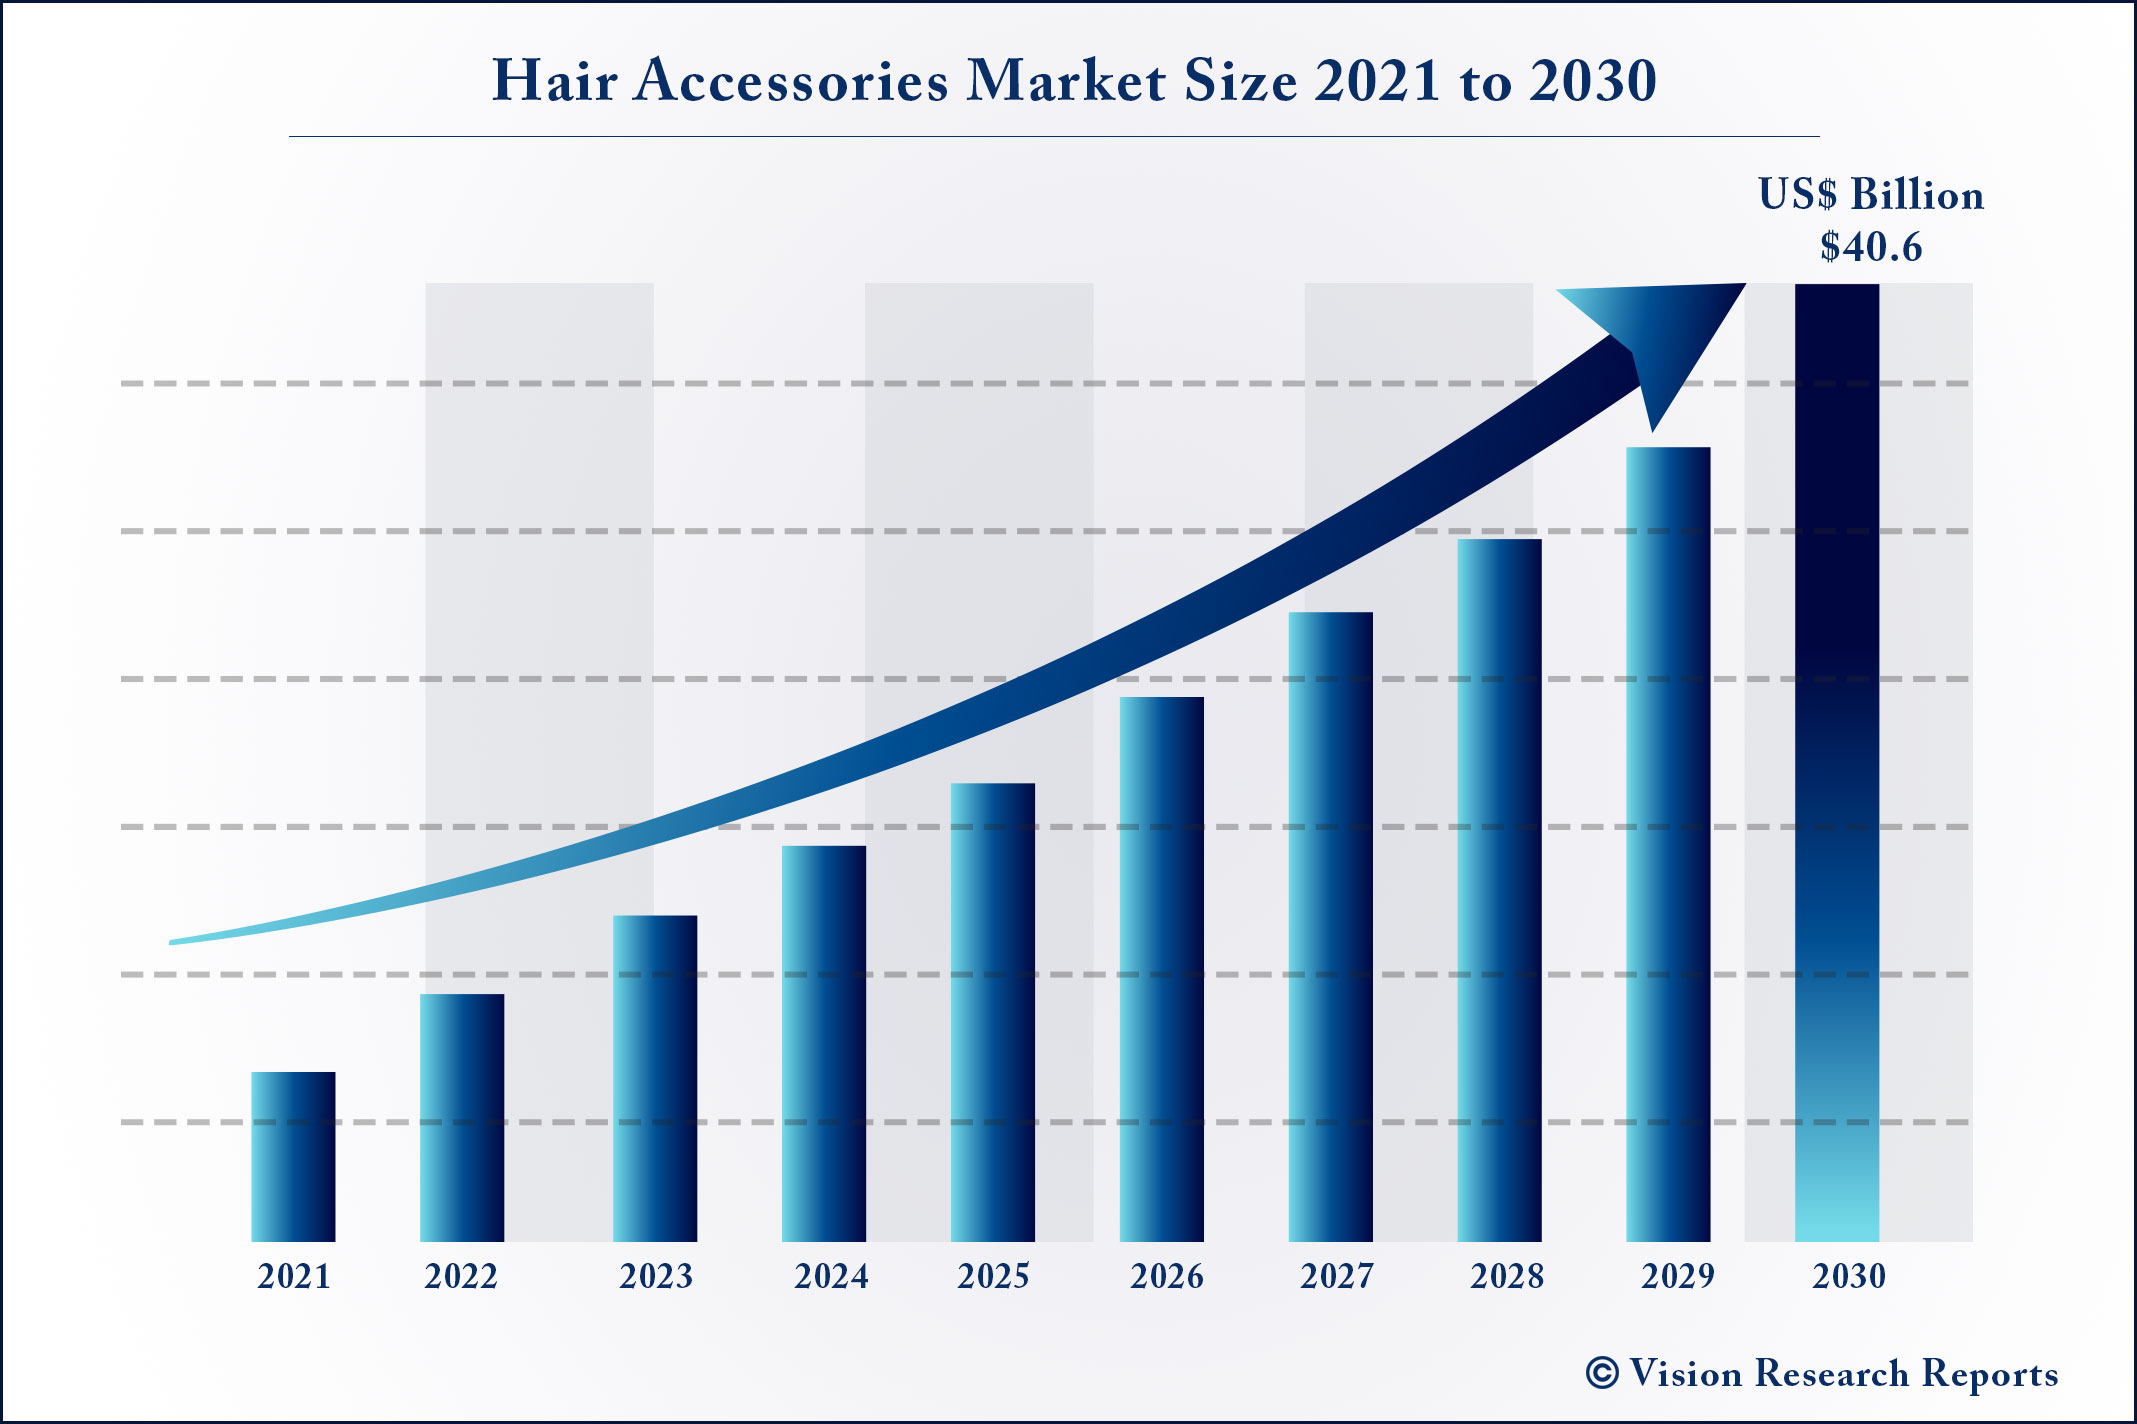 Hair Accessories Market Size 2021 to 2030